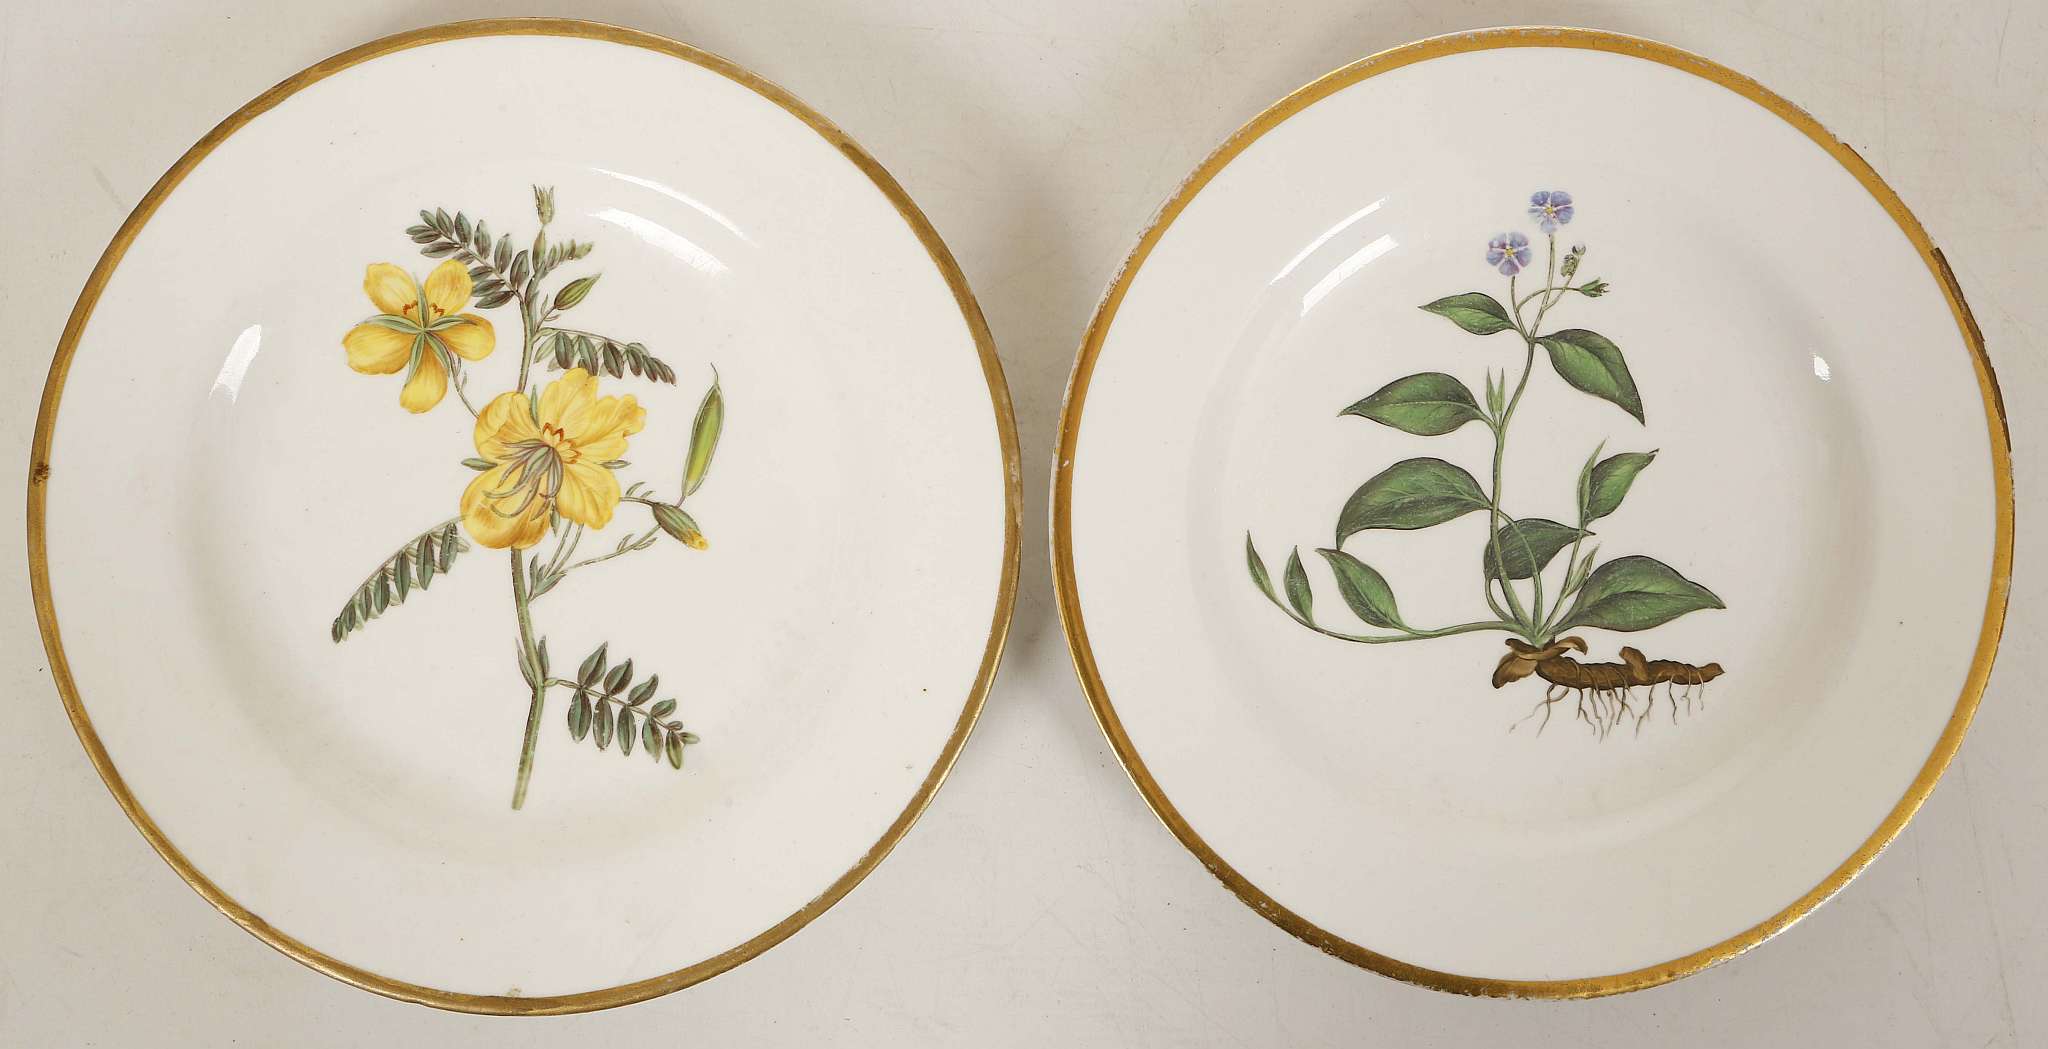 A PAIR OF SPODE BOTANICAL PLATES, circa 1810, one painted with 'Blue Navelwort' and the other